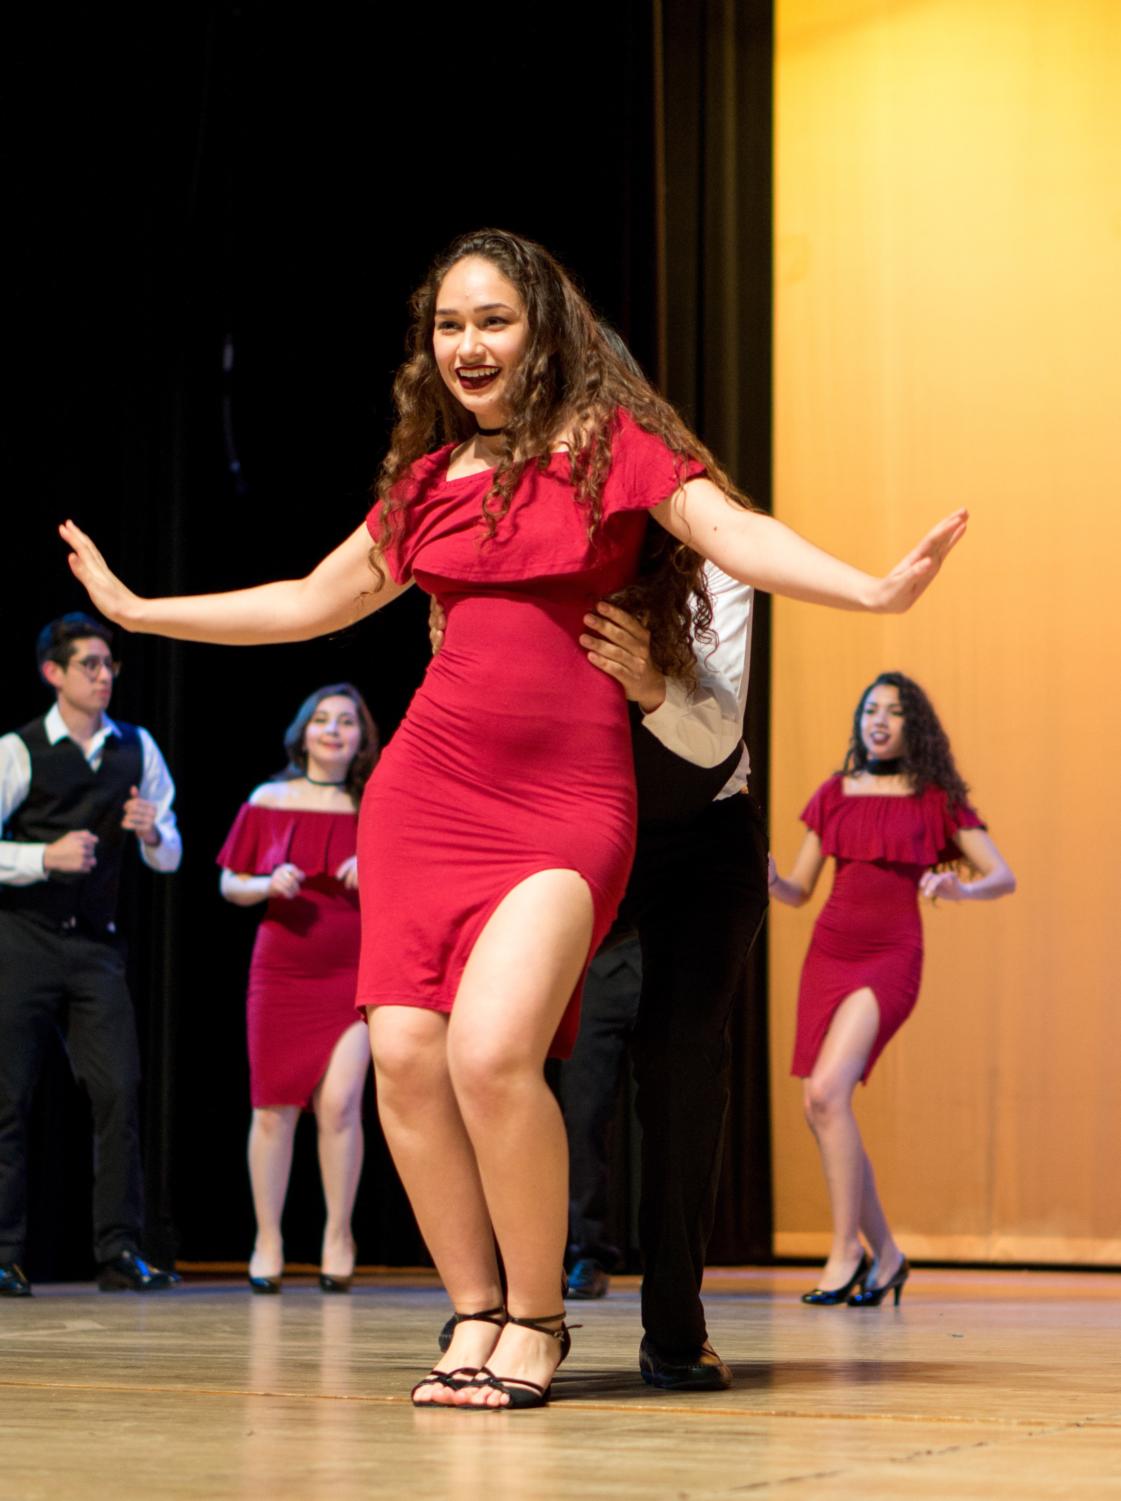 The Organization of Latin American Students (OLAS) Cultural Show features many different Latin American dance styles.